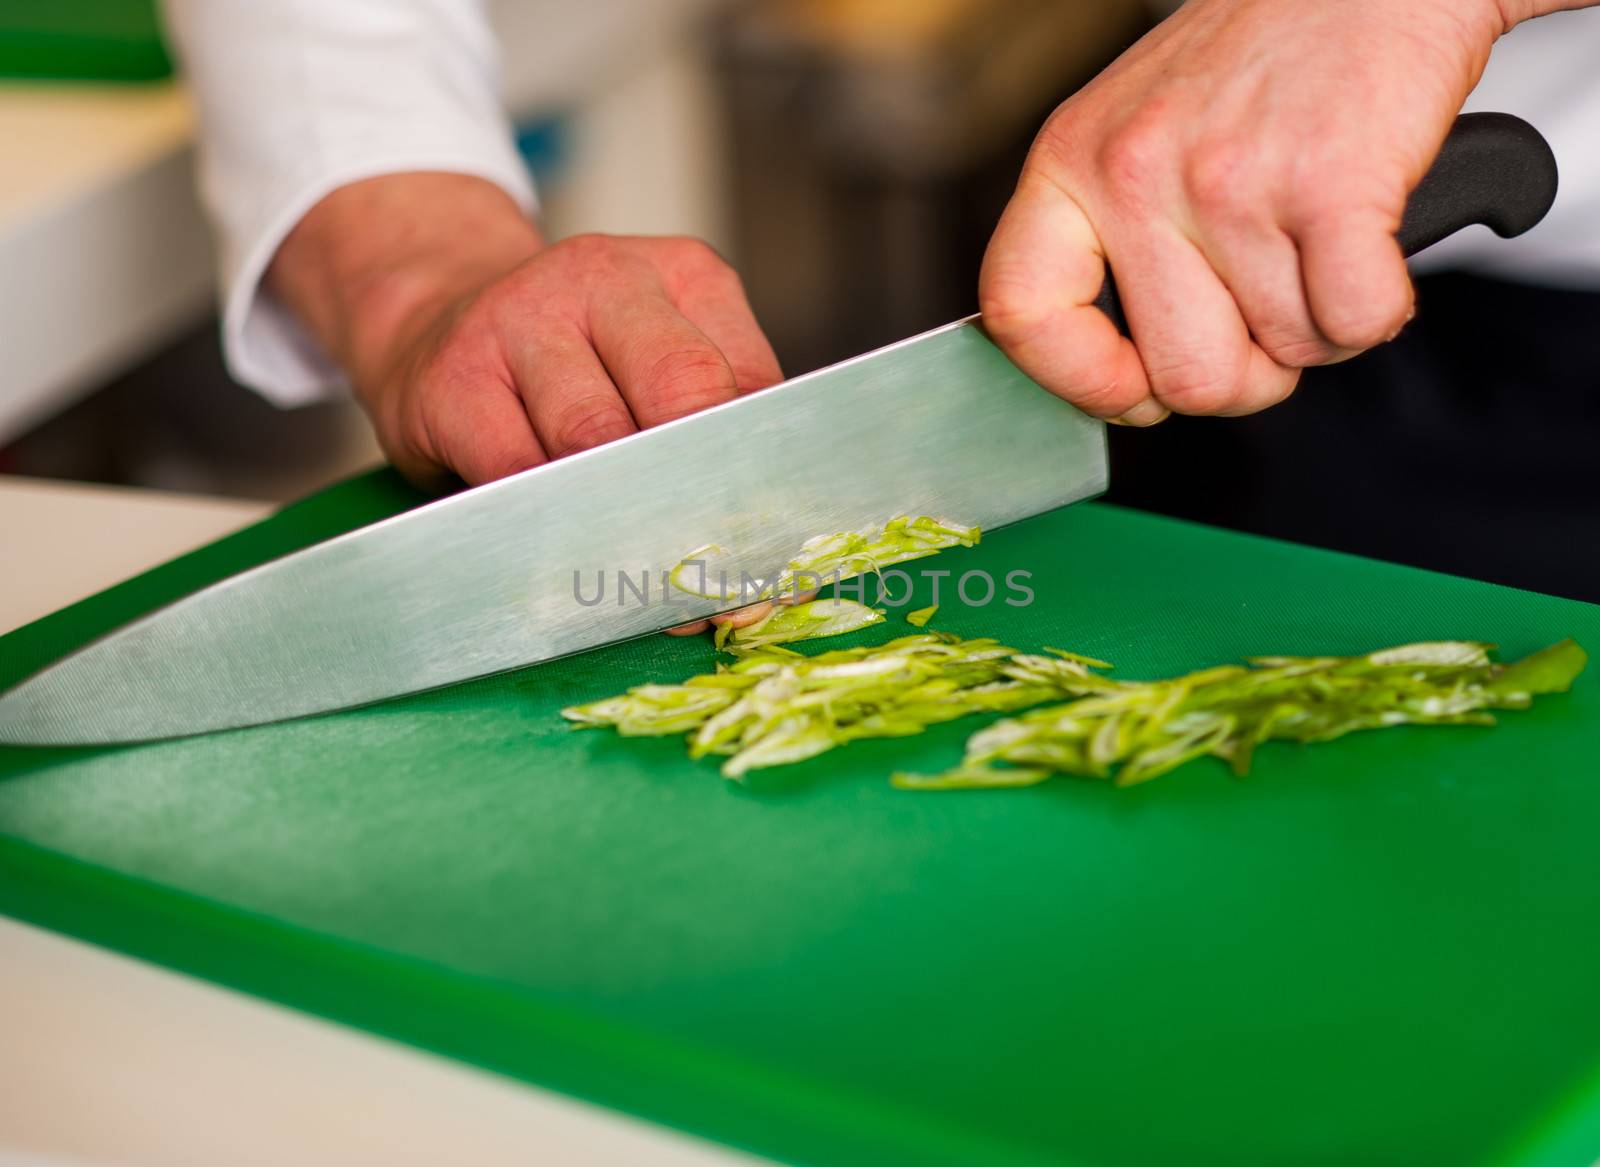 Chef chopping leek over green carving board.